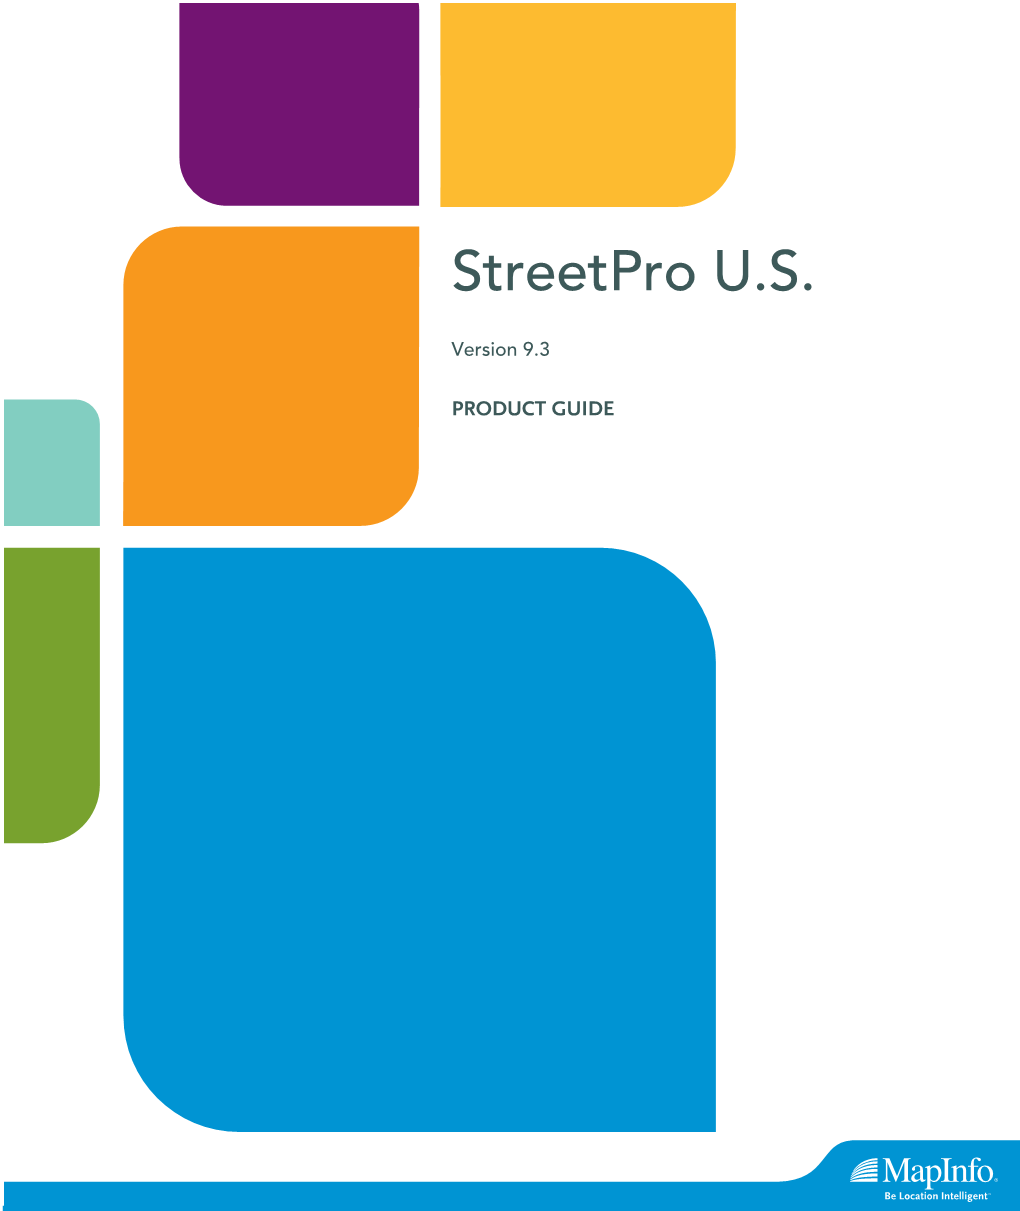 Streetpro US Product Guide